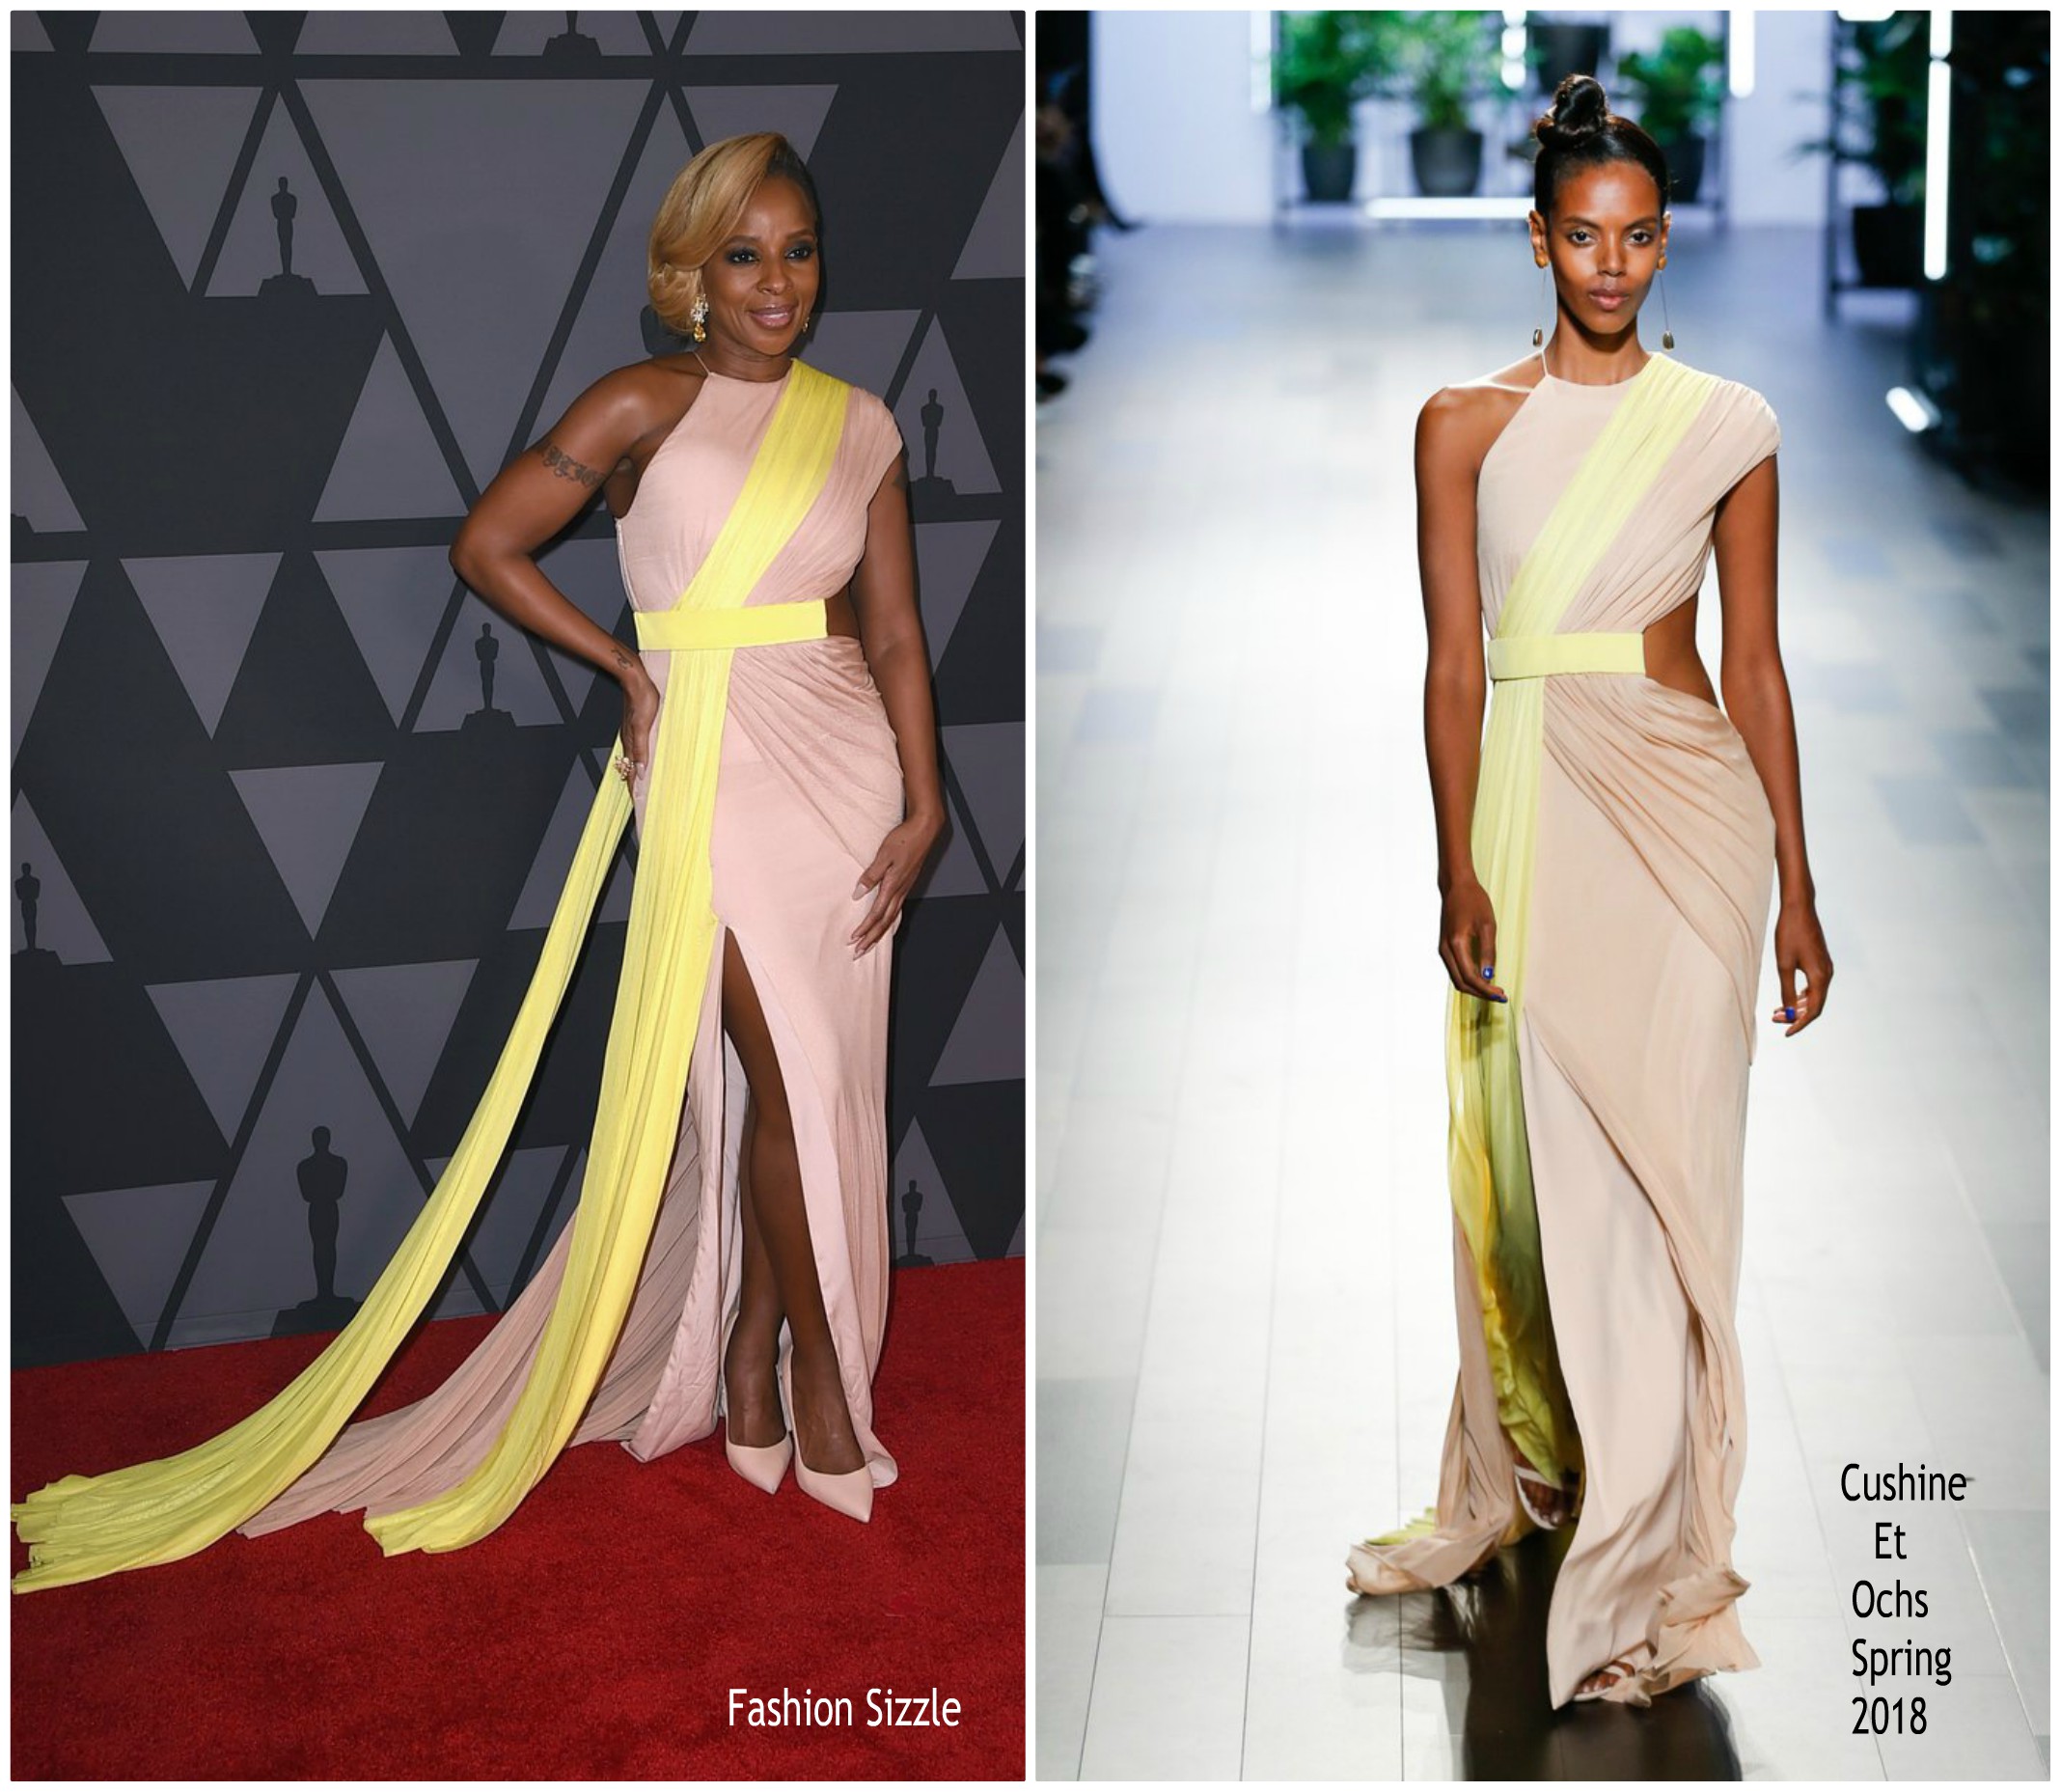 mary-j-blige-in-cushine-et-ochs-academy-of-motion-picyure-arts-sciences-9th-annual-governors-awards